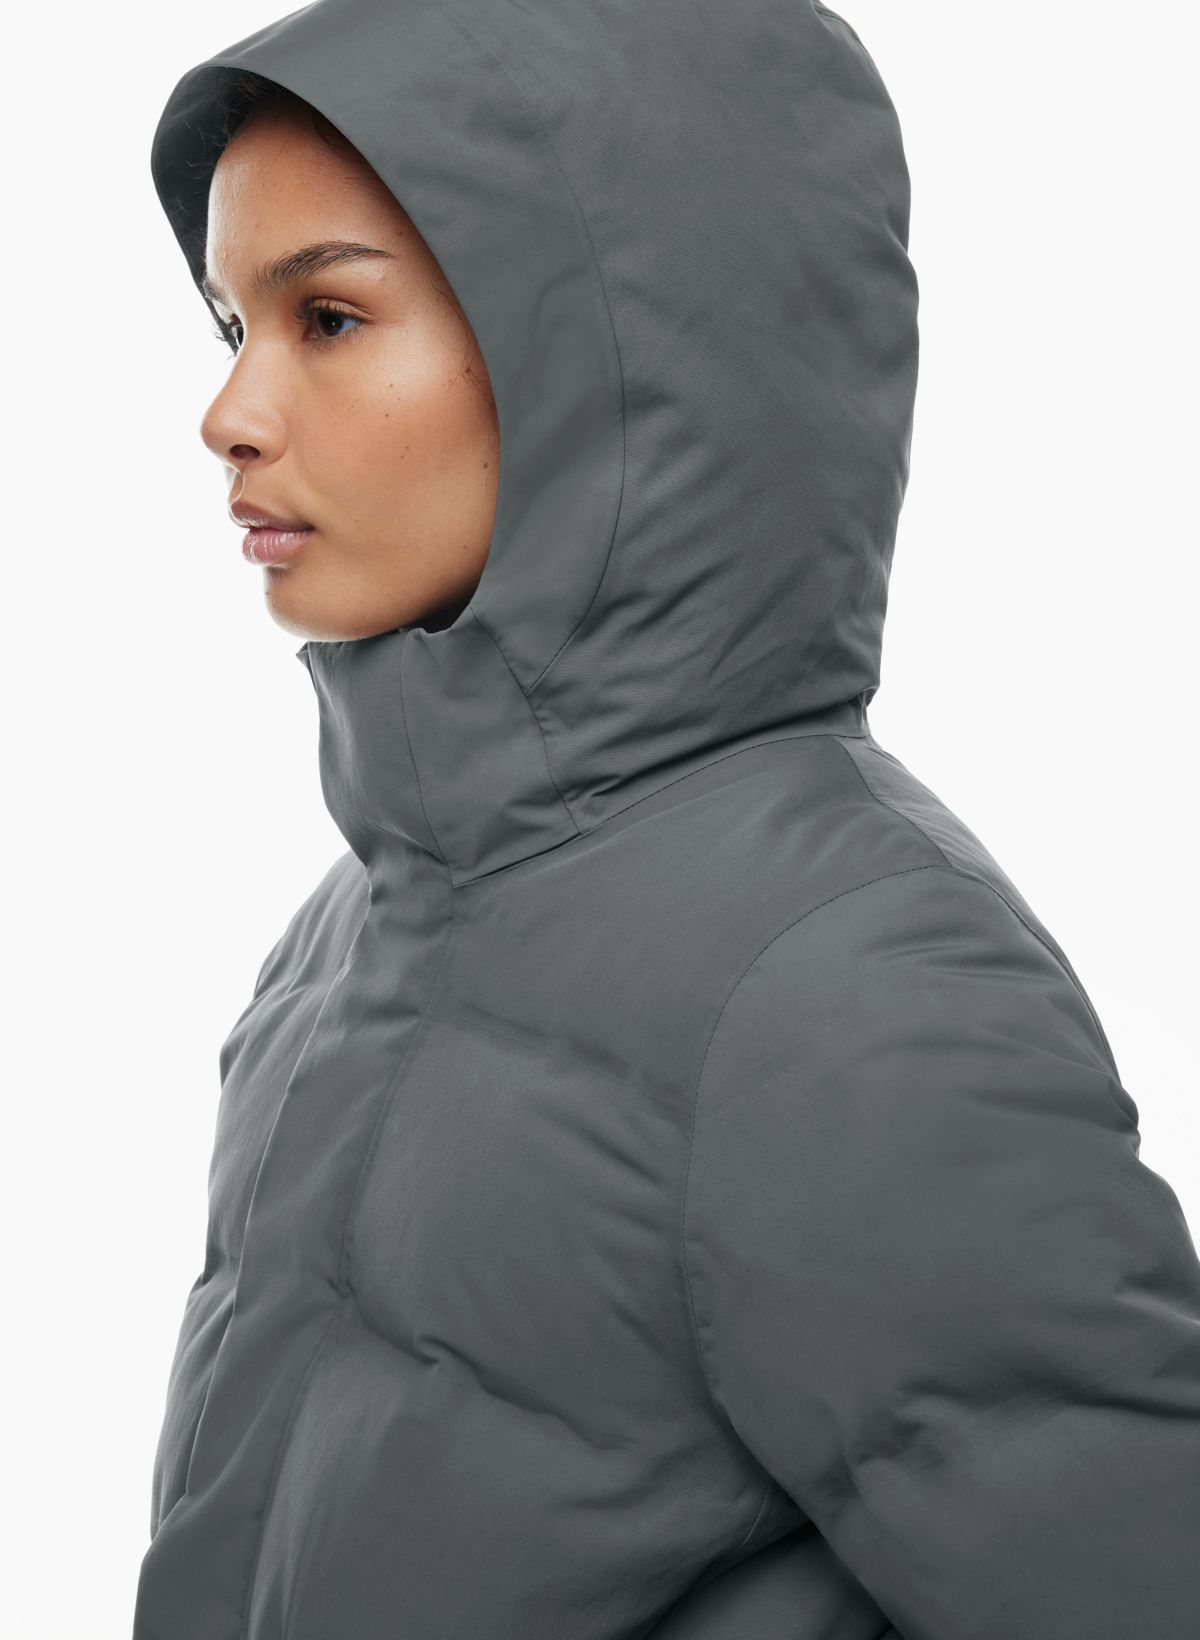 The North Face Mens Steep Tech Jacket – Extra Butter